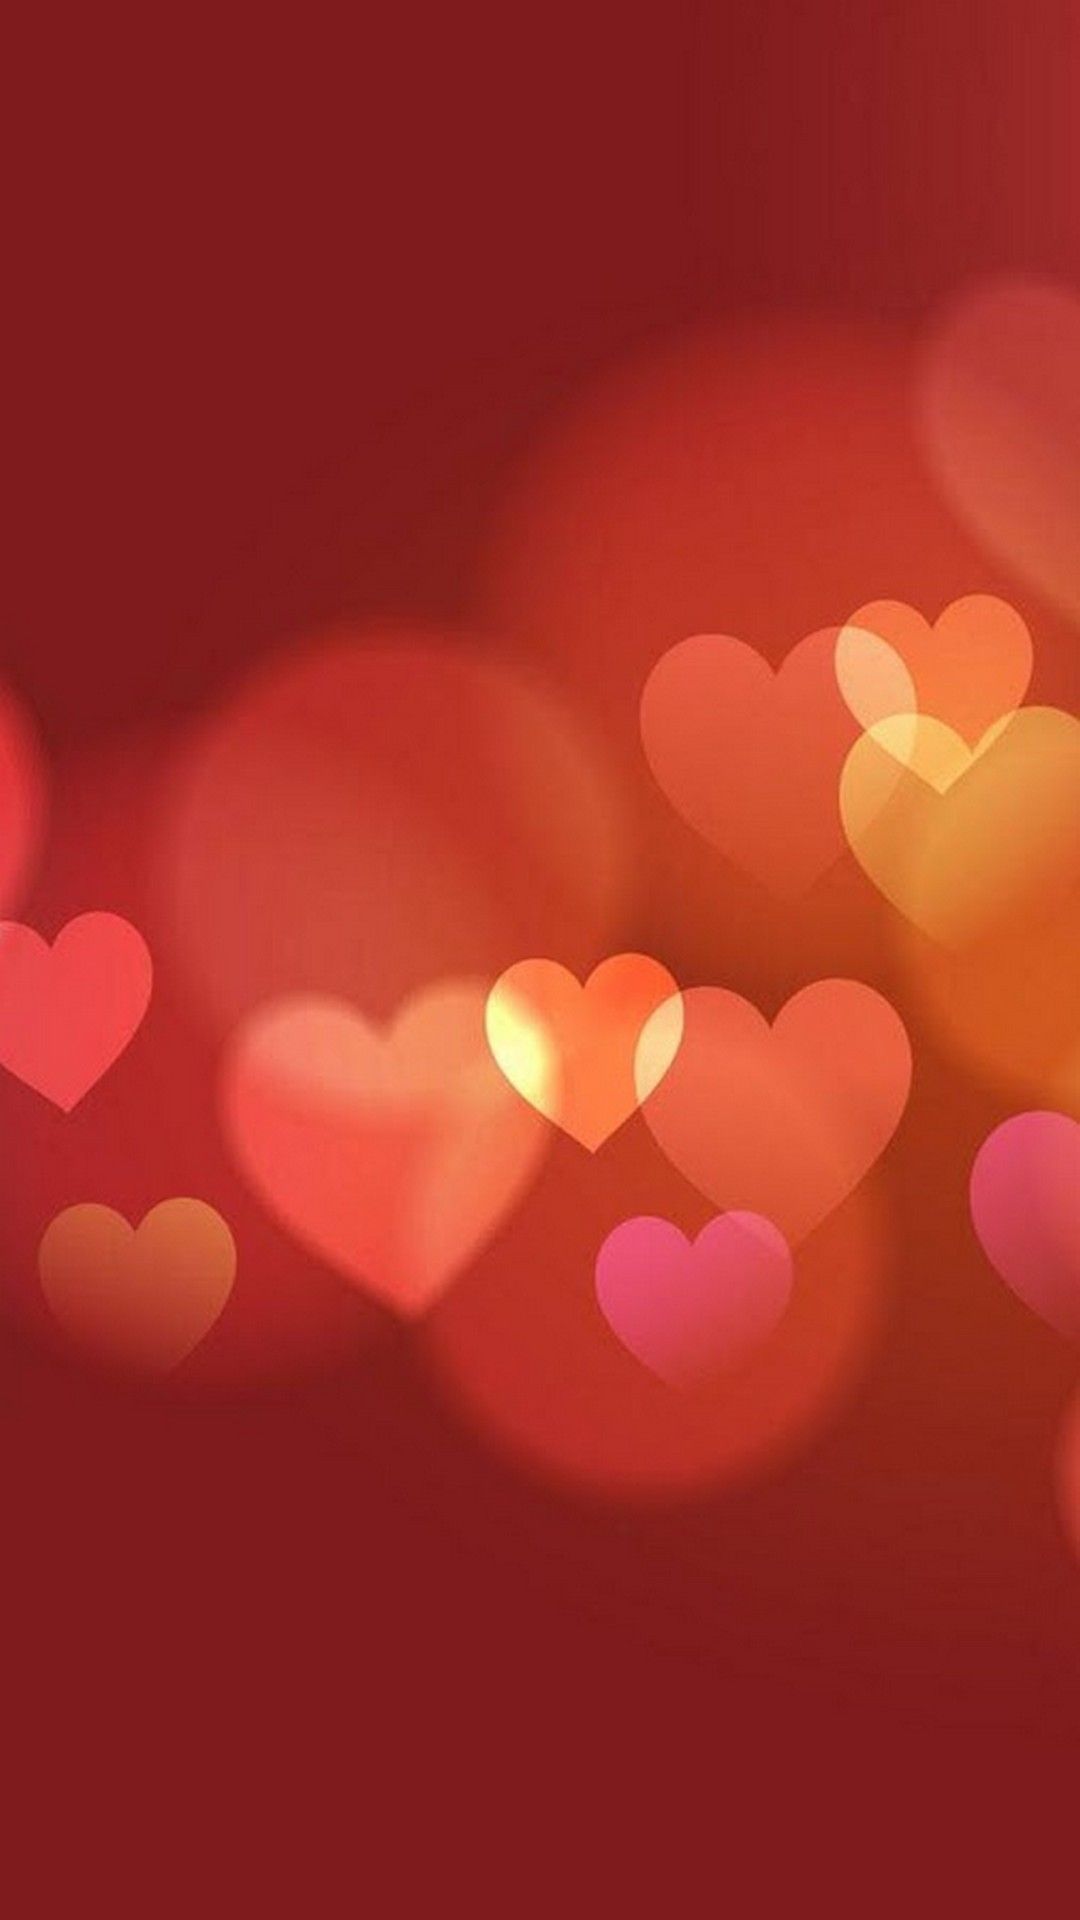 64+] Cute Valentines Day Backgrounds - WallpaperSafari